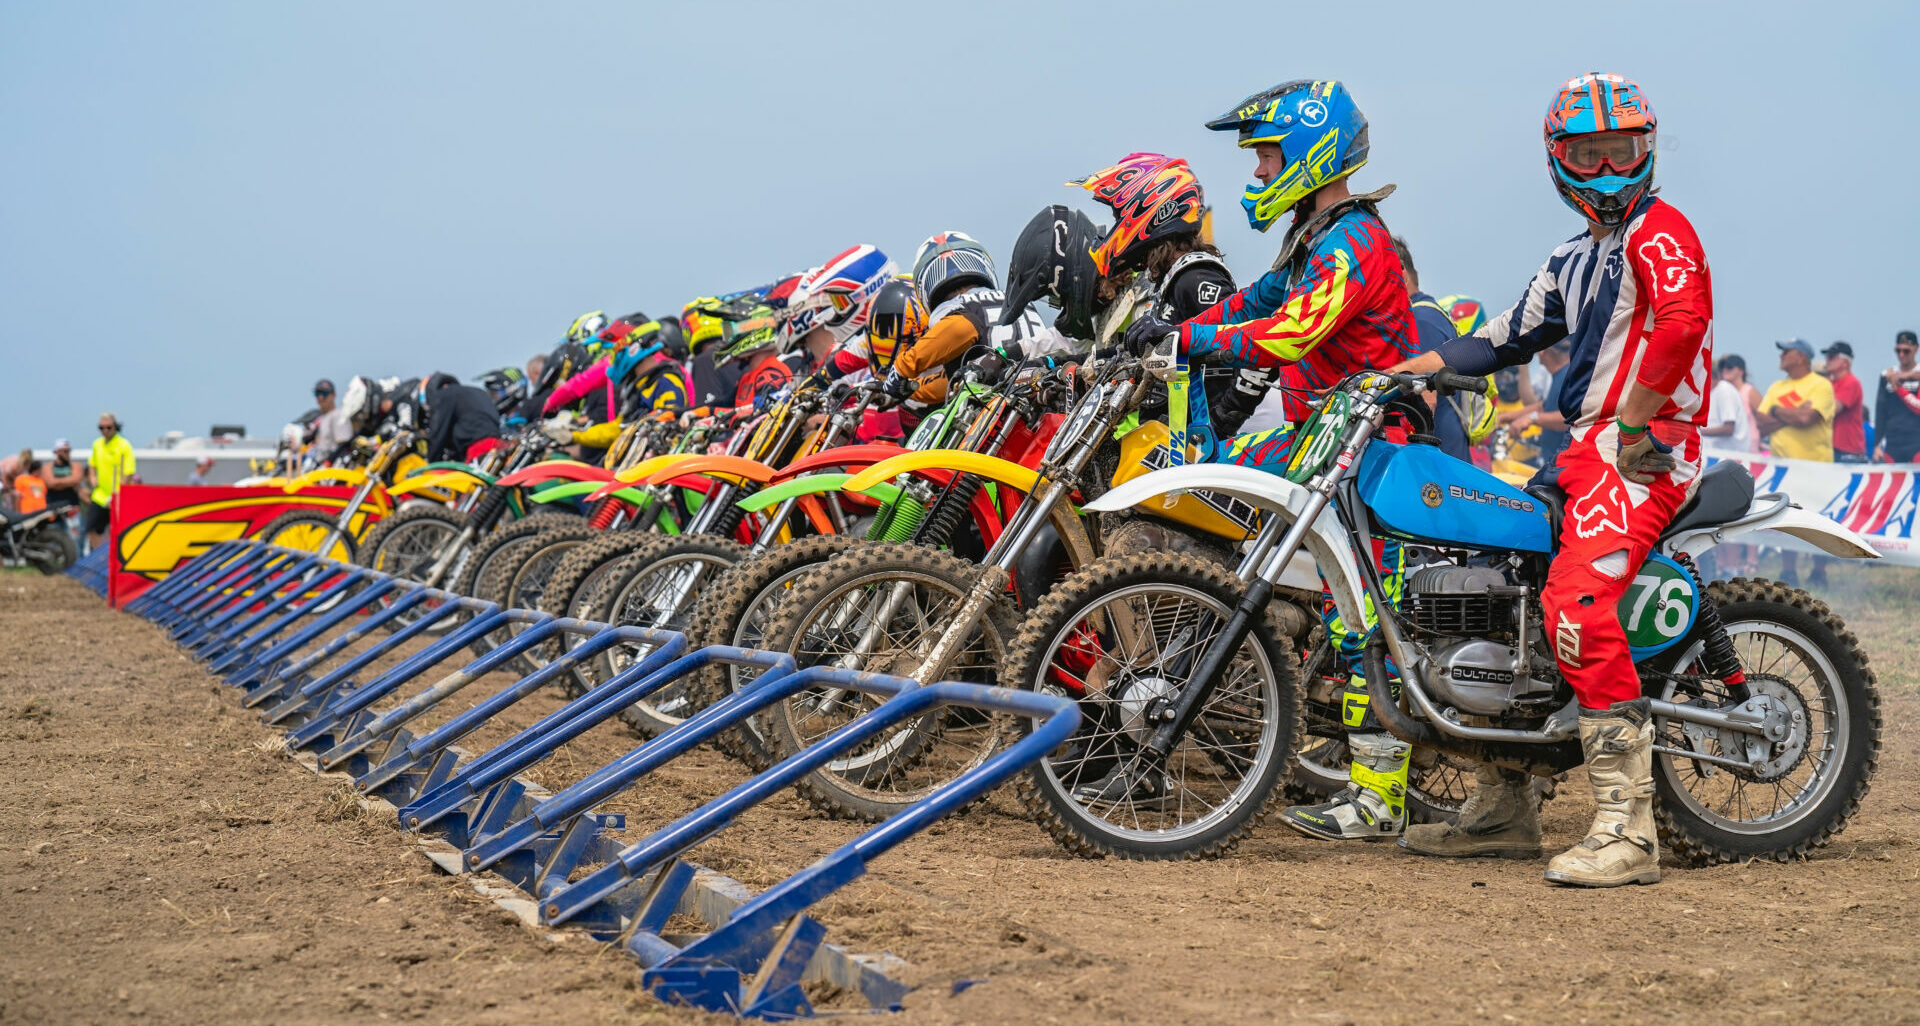 Motocross riders at the starting gate during a past AMA Vintage Motorcycle Days (VMD) at Mid-Ohio. Photo by Stephanie Vetterly, courtesy AMA.